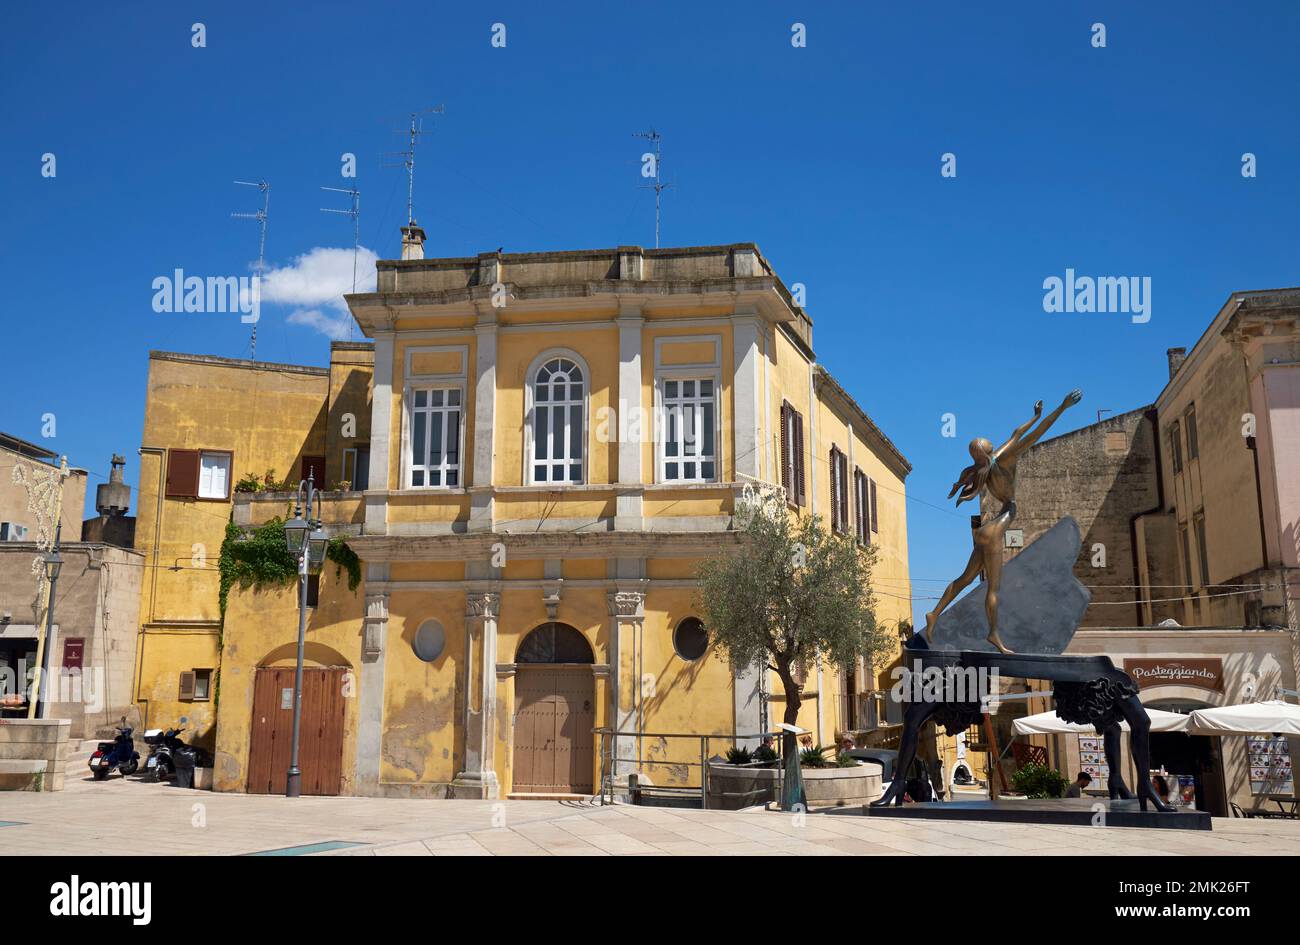 Piazza Francesco d'Assis, Matera, Basilicata, Italy, with a bronze sculpture of Salvador Dali's 'Surrealist Piano' on the right. Stock Photo